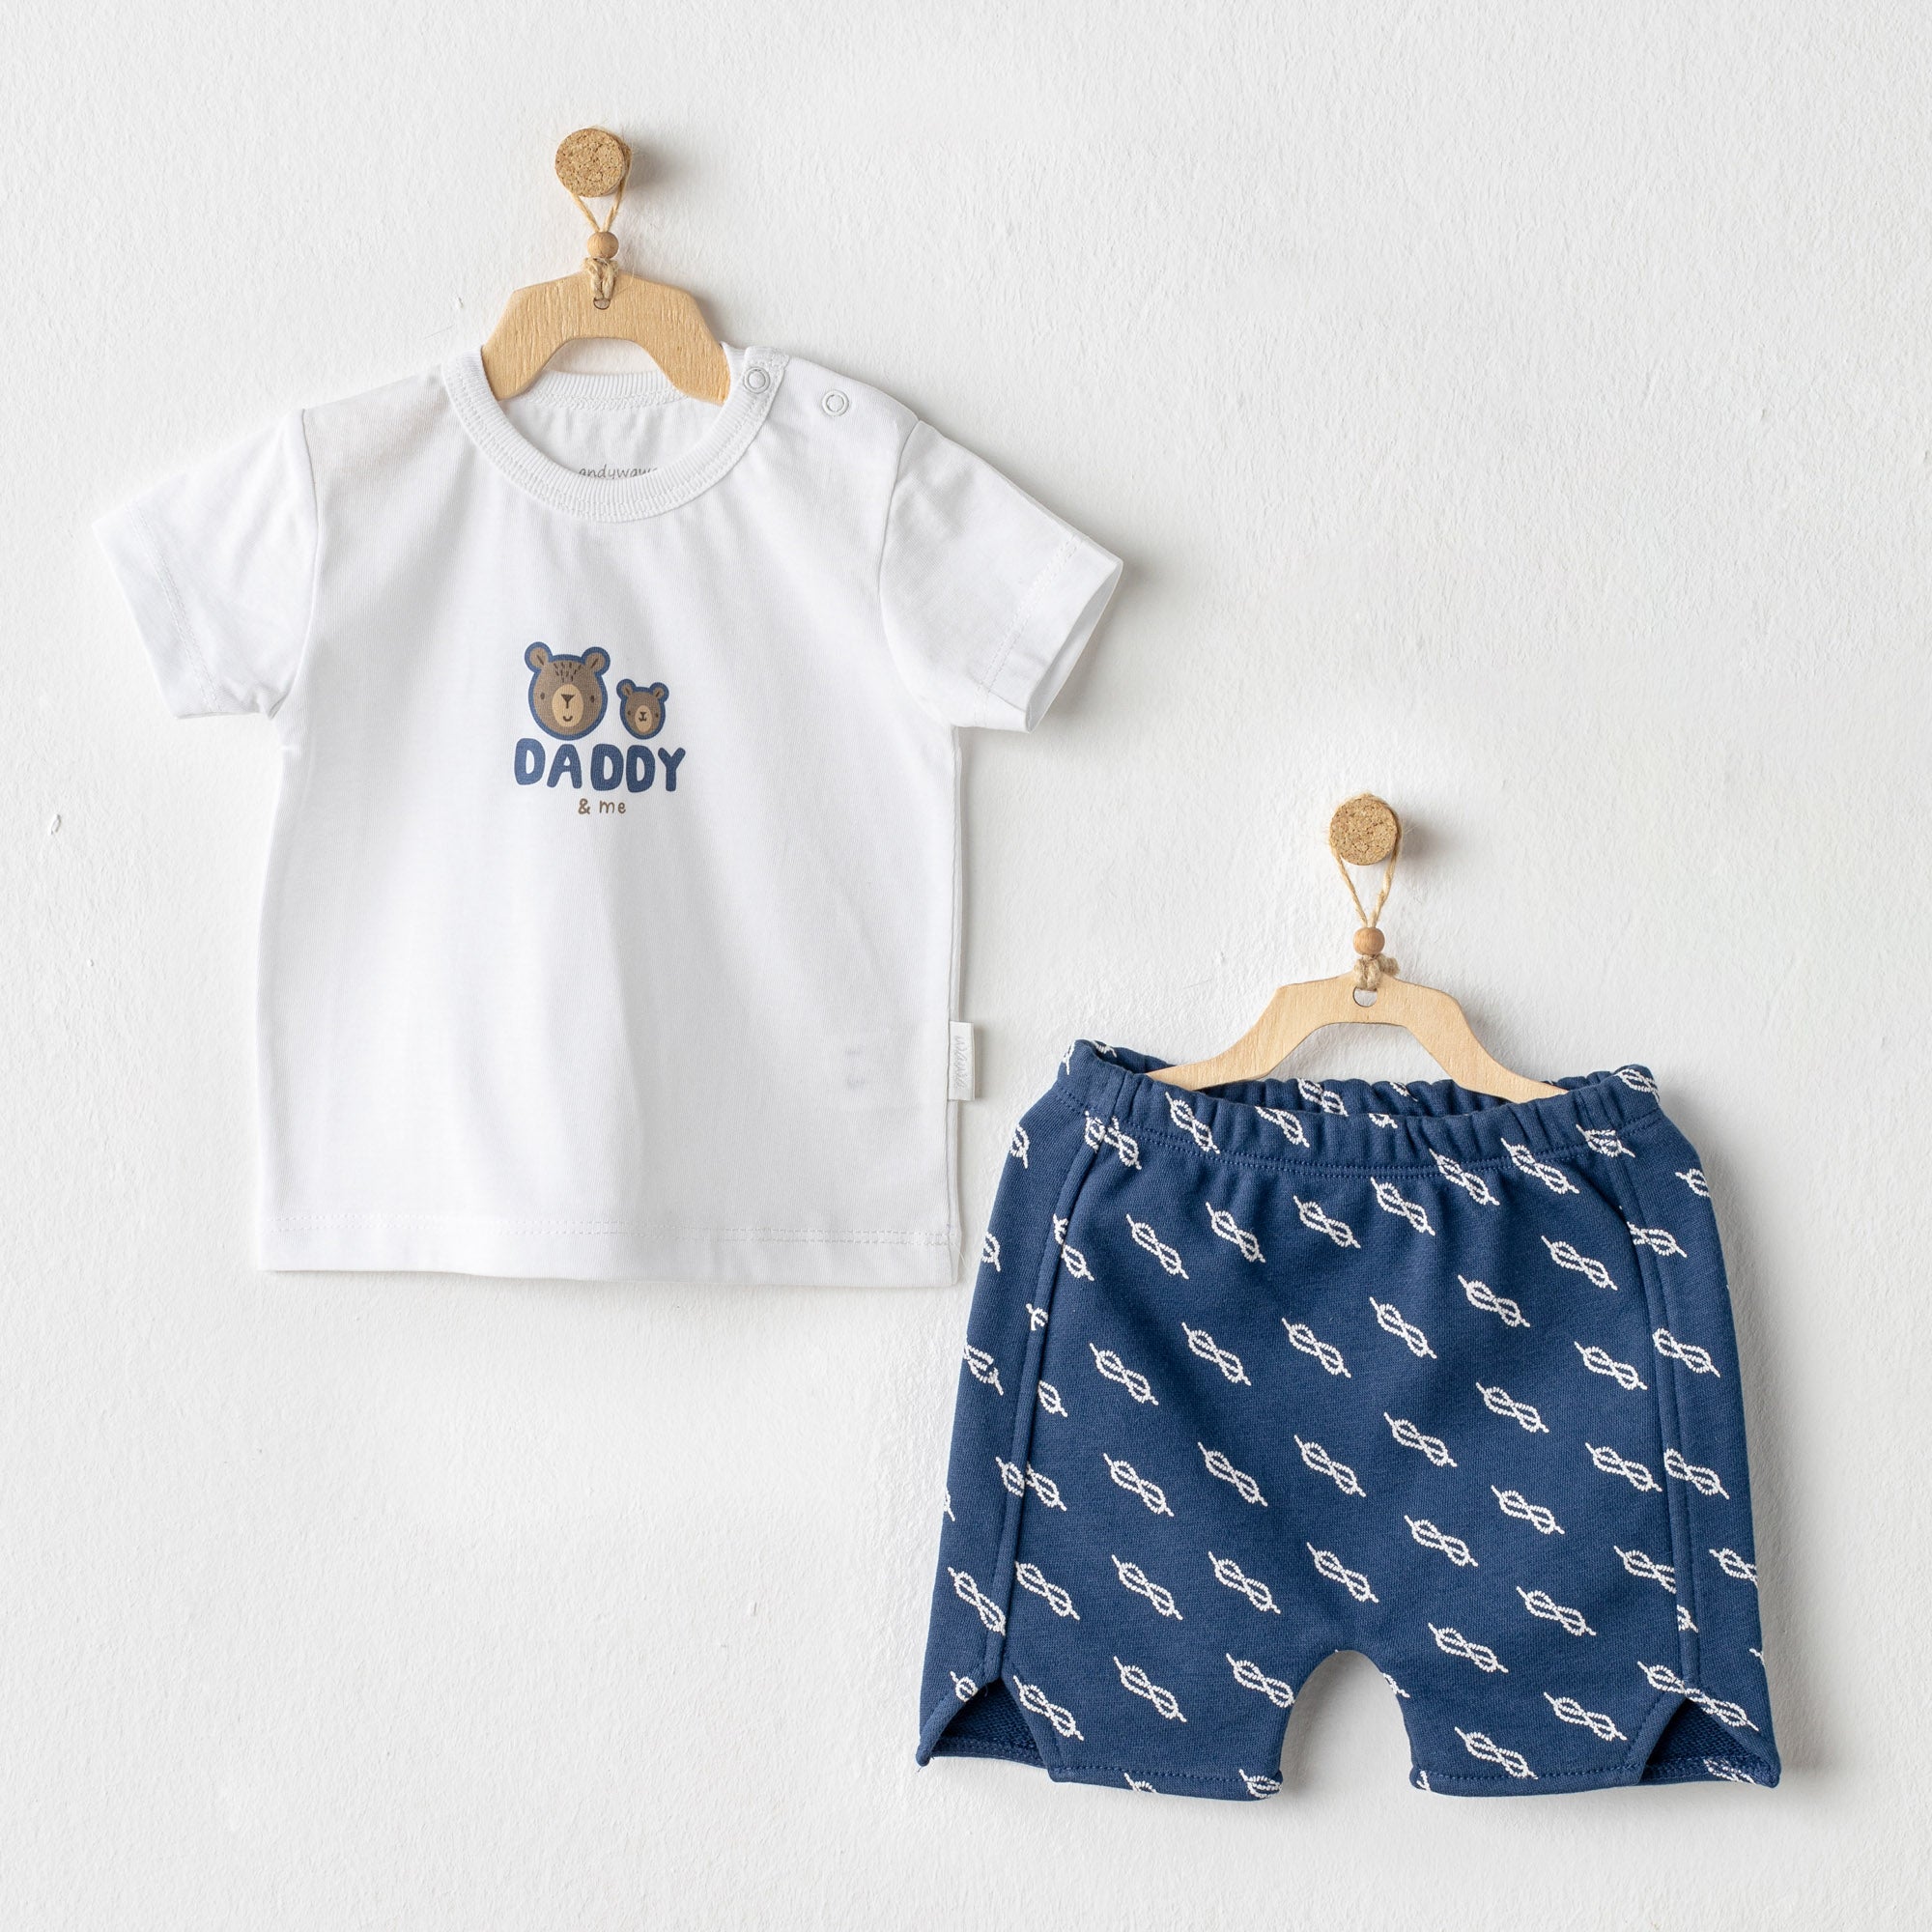 Short sleeves T-shirt and short for baby boys - Short sleeves T-shirt and short for baby boys - 1-3 Months - Andywawa - Melymod